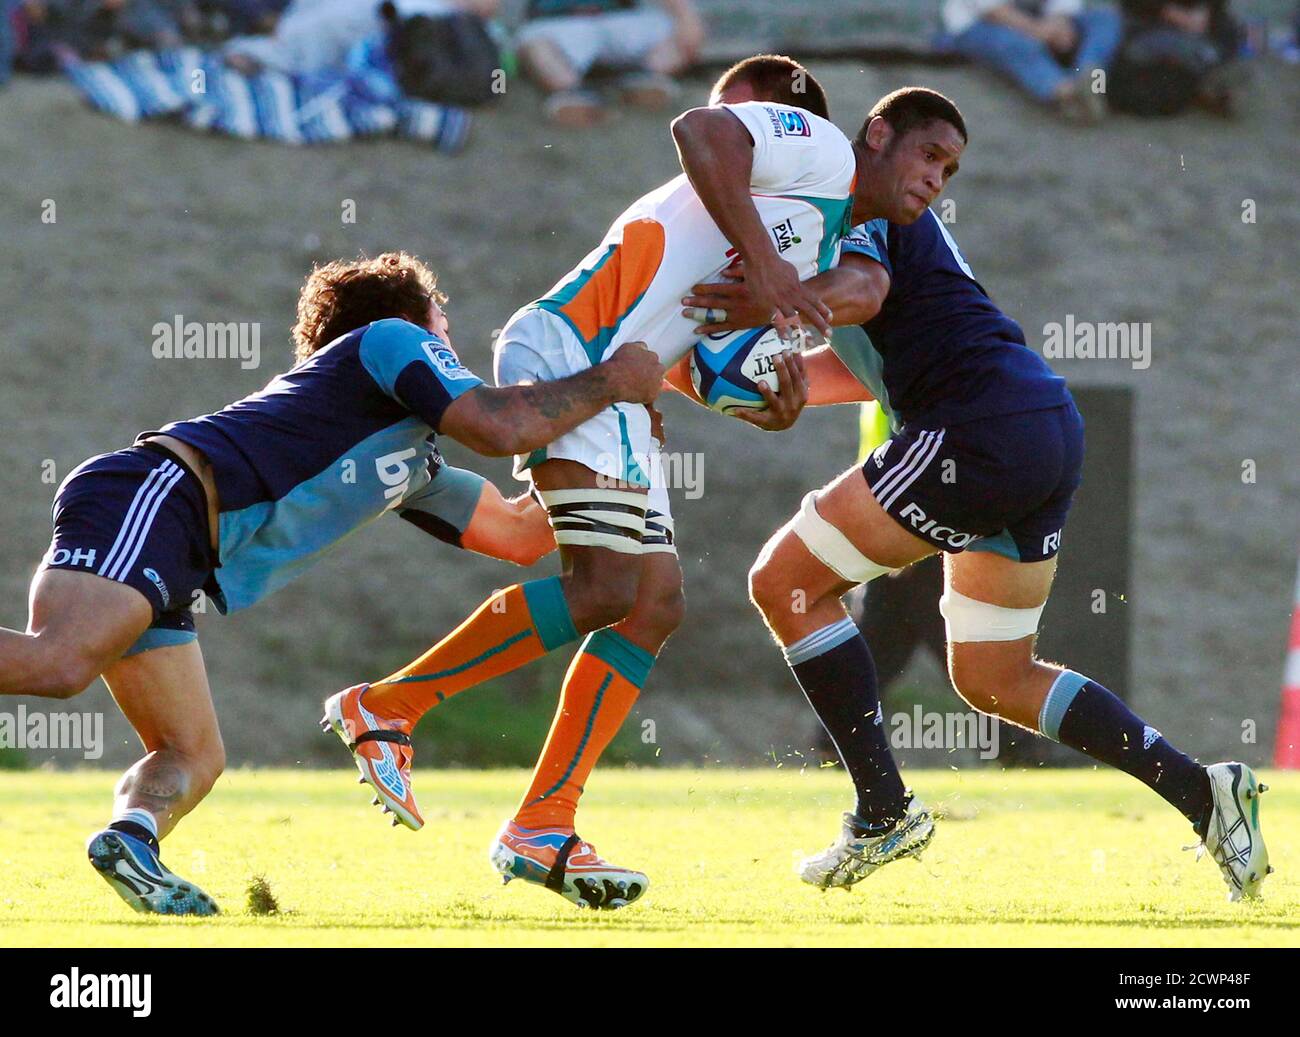 Devon Raubenheimer (C) of the South African Cheetahs is tackled by Rene Ranger (L) and Chris Lowery of New Zealand's Auckland Blues during their Super 15 rugby match in Whangarei April 2, 2011. The Blues won the match 29-22. REUTERS/Nigel Marple (NEW ZEALAND - Tags: SPORT RUGBY) Stock Photo